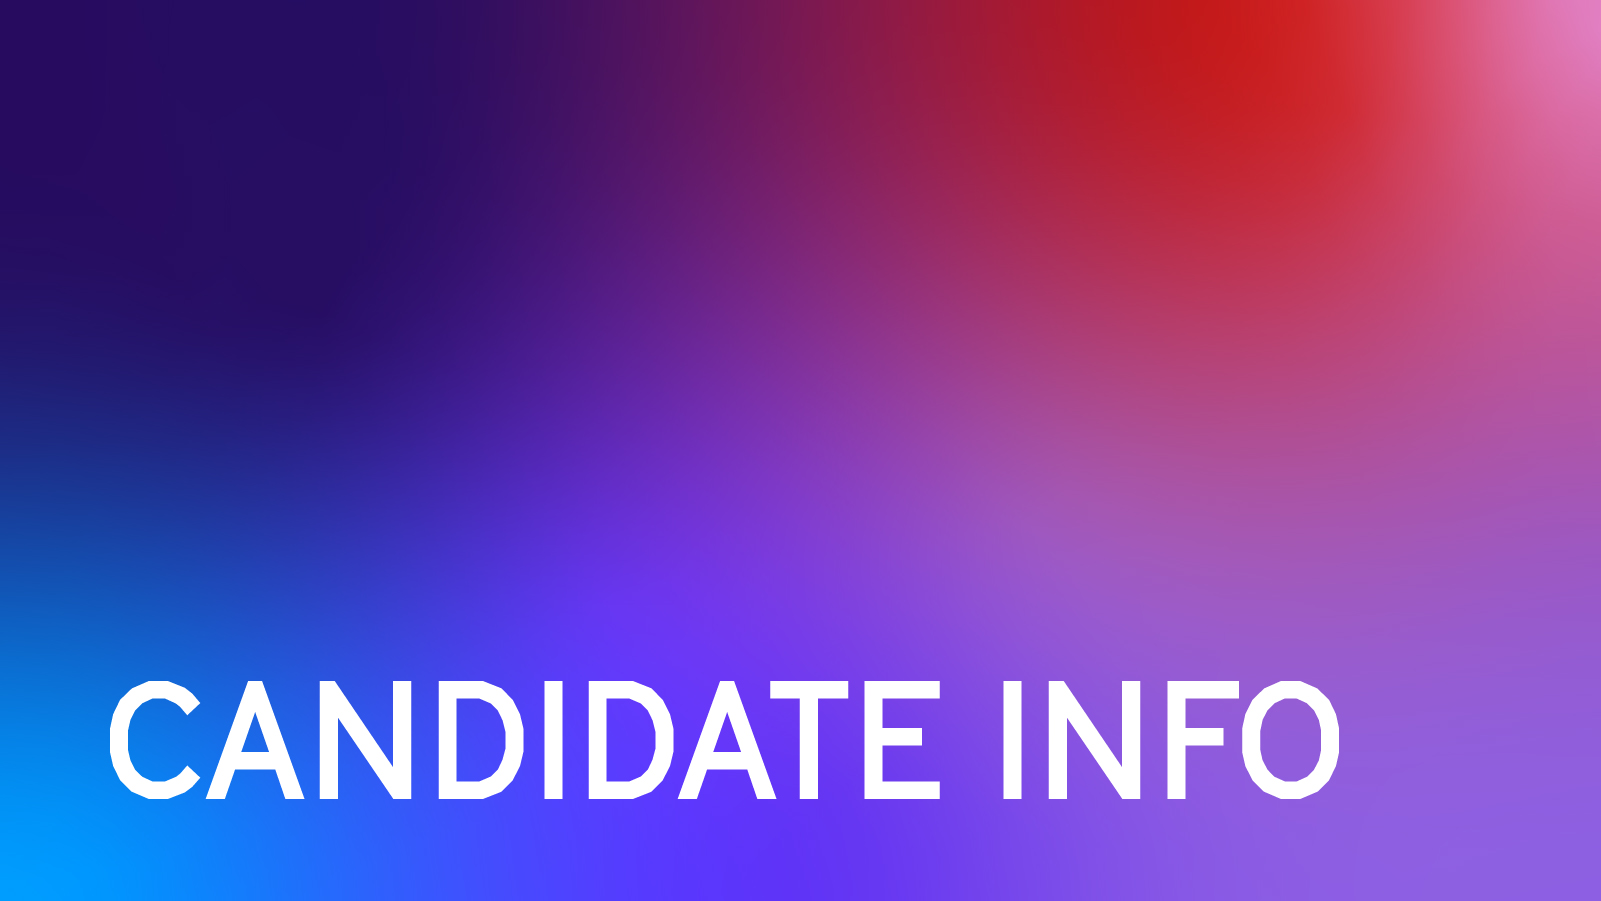 Student Rep Elections - Candidate Info and Rules